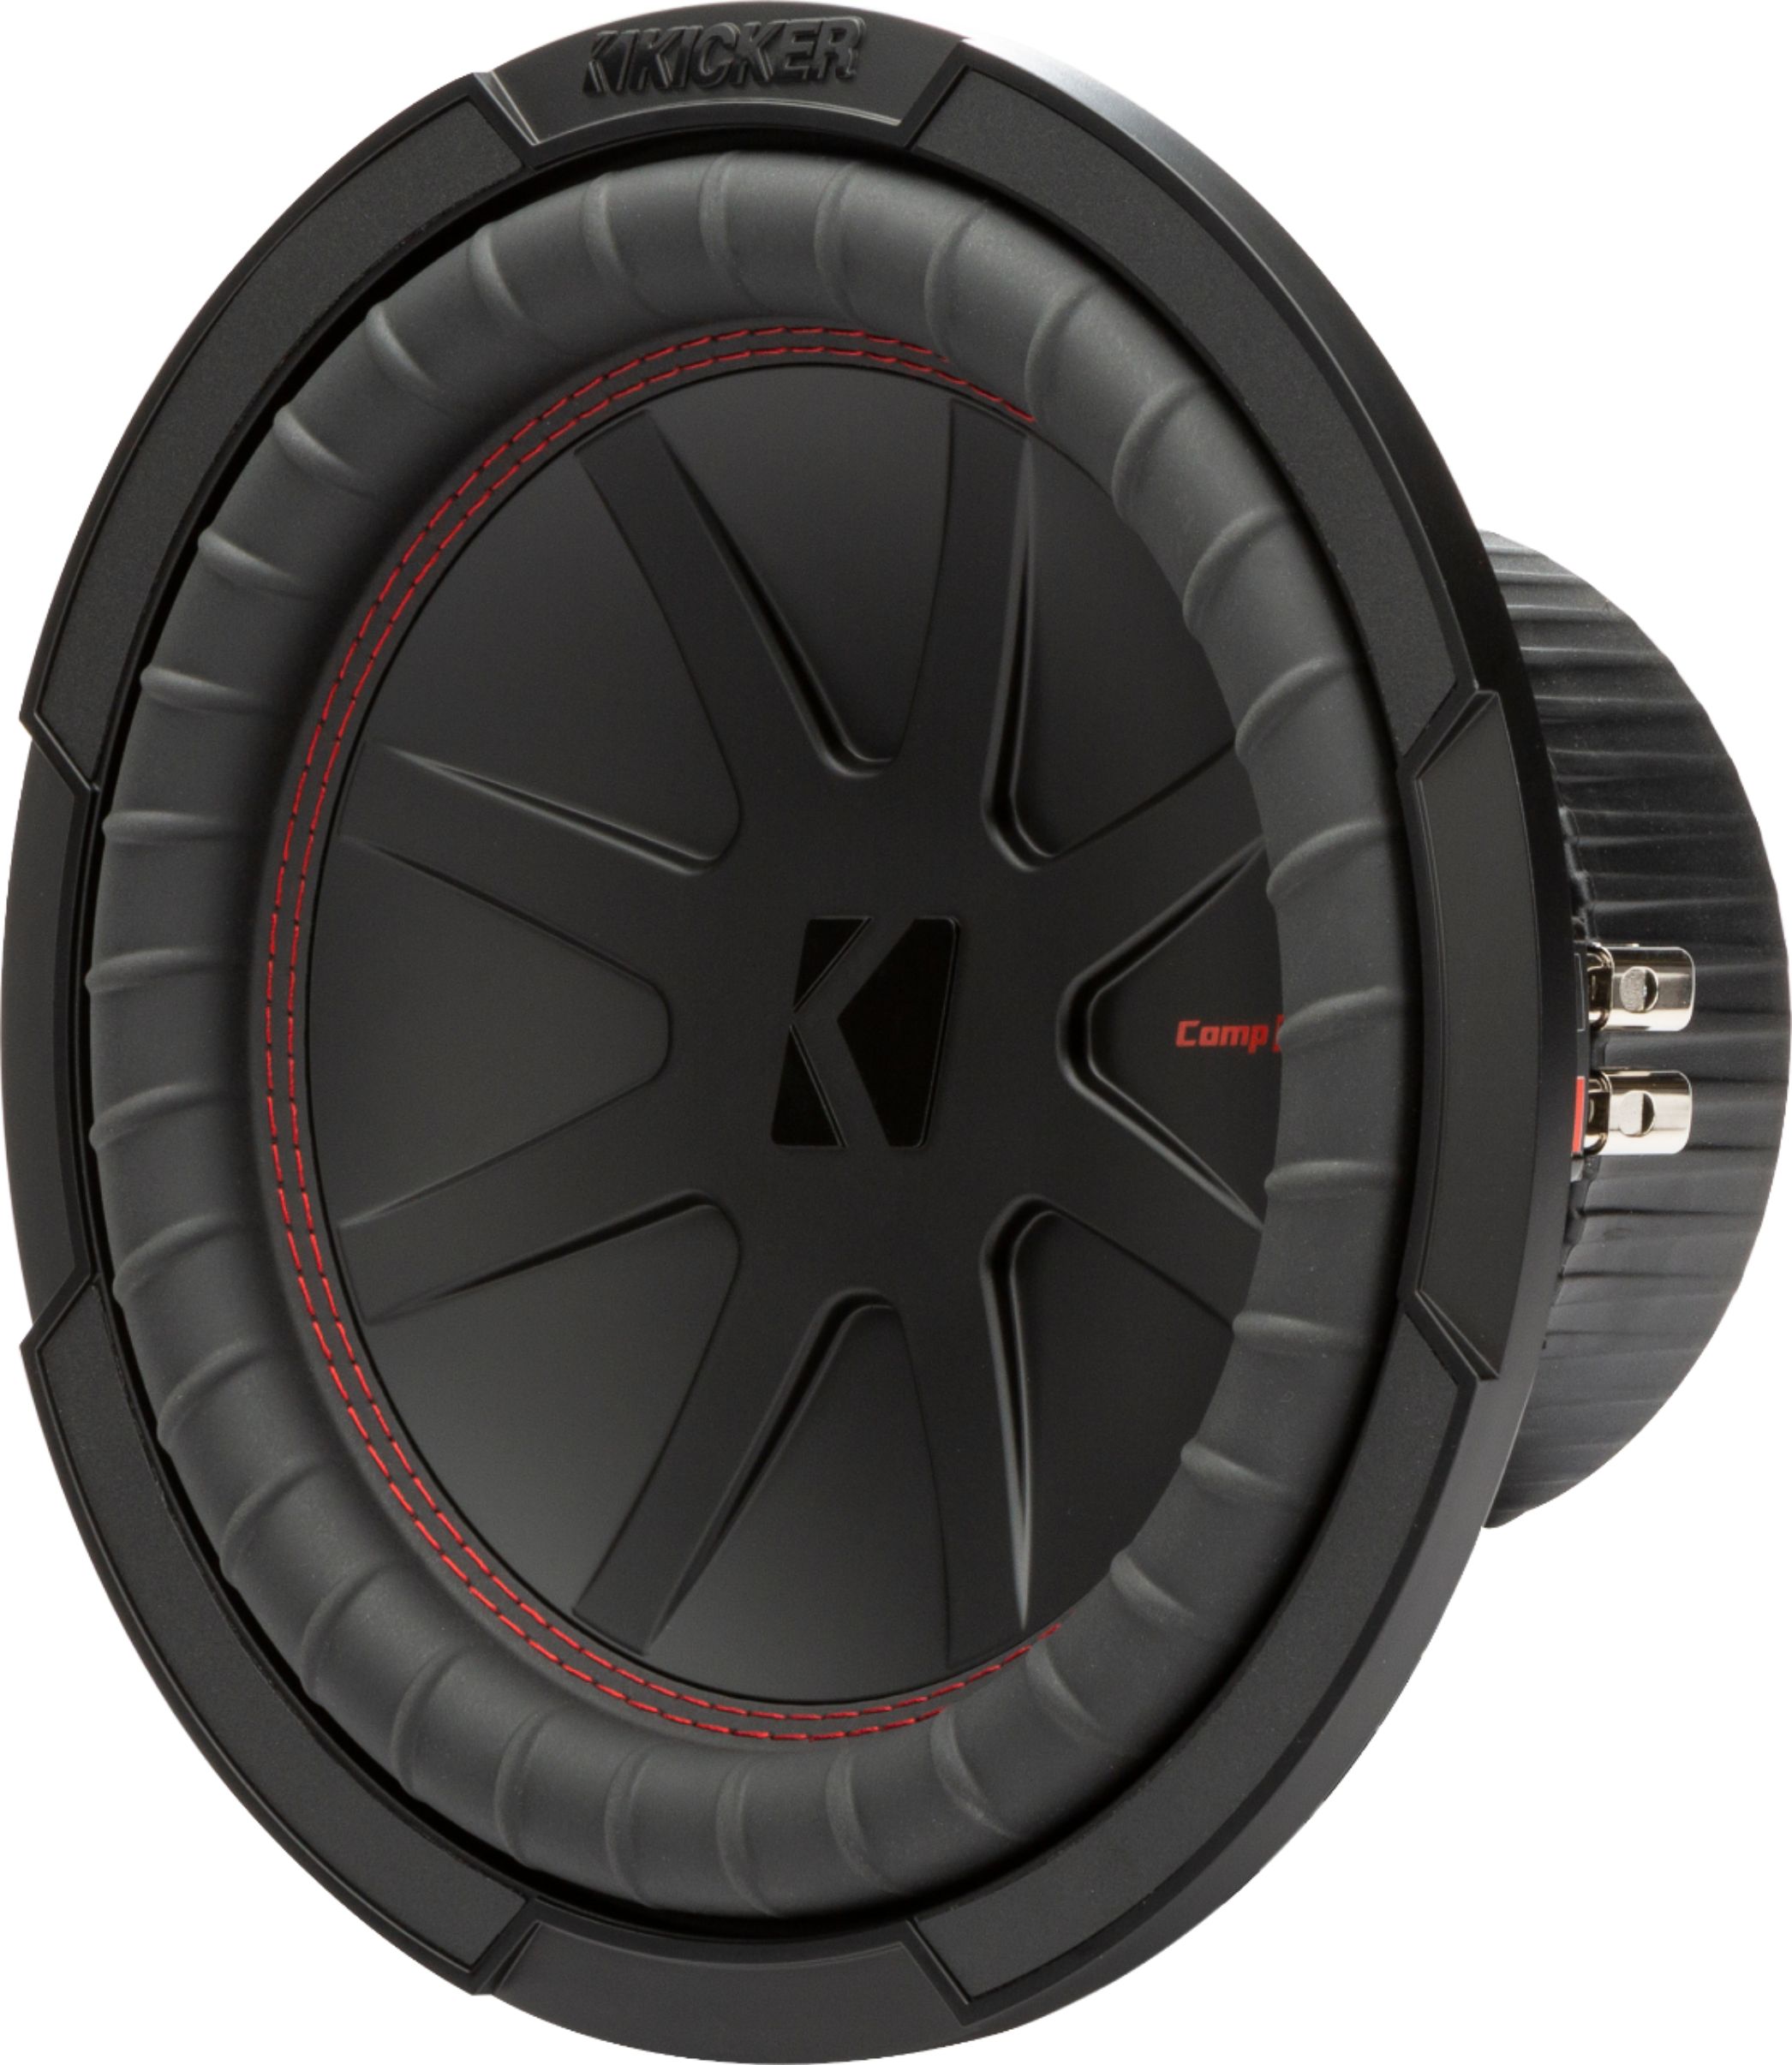 Left View: JBL - BASSPRO 8" Single-Voice-Coil Loaded Subwoofer Enclosure with Integrated Amp - Black